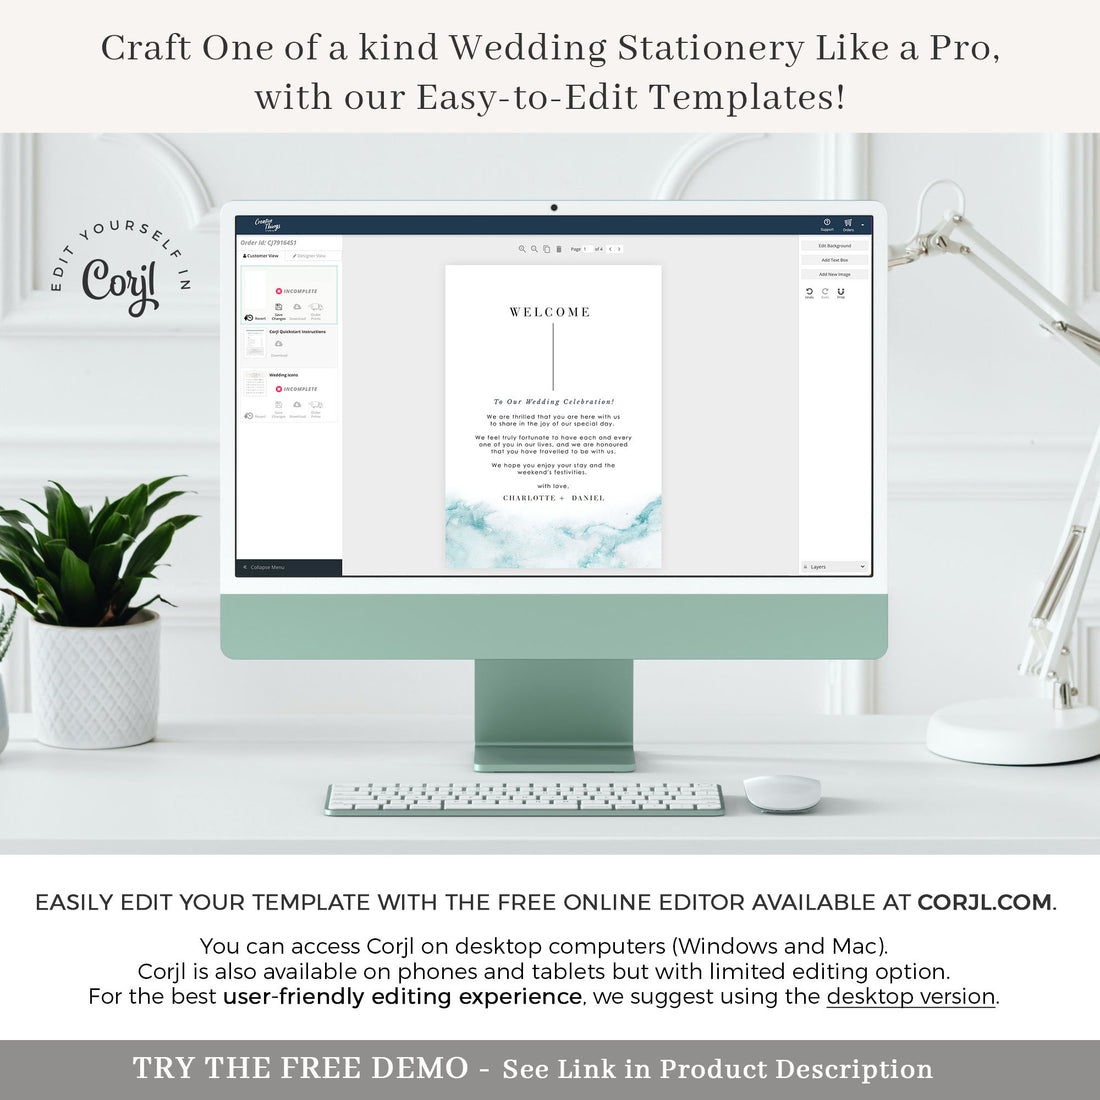 CHIARA Wedding Day Schedule Timeline & Welcome Letter Template